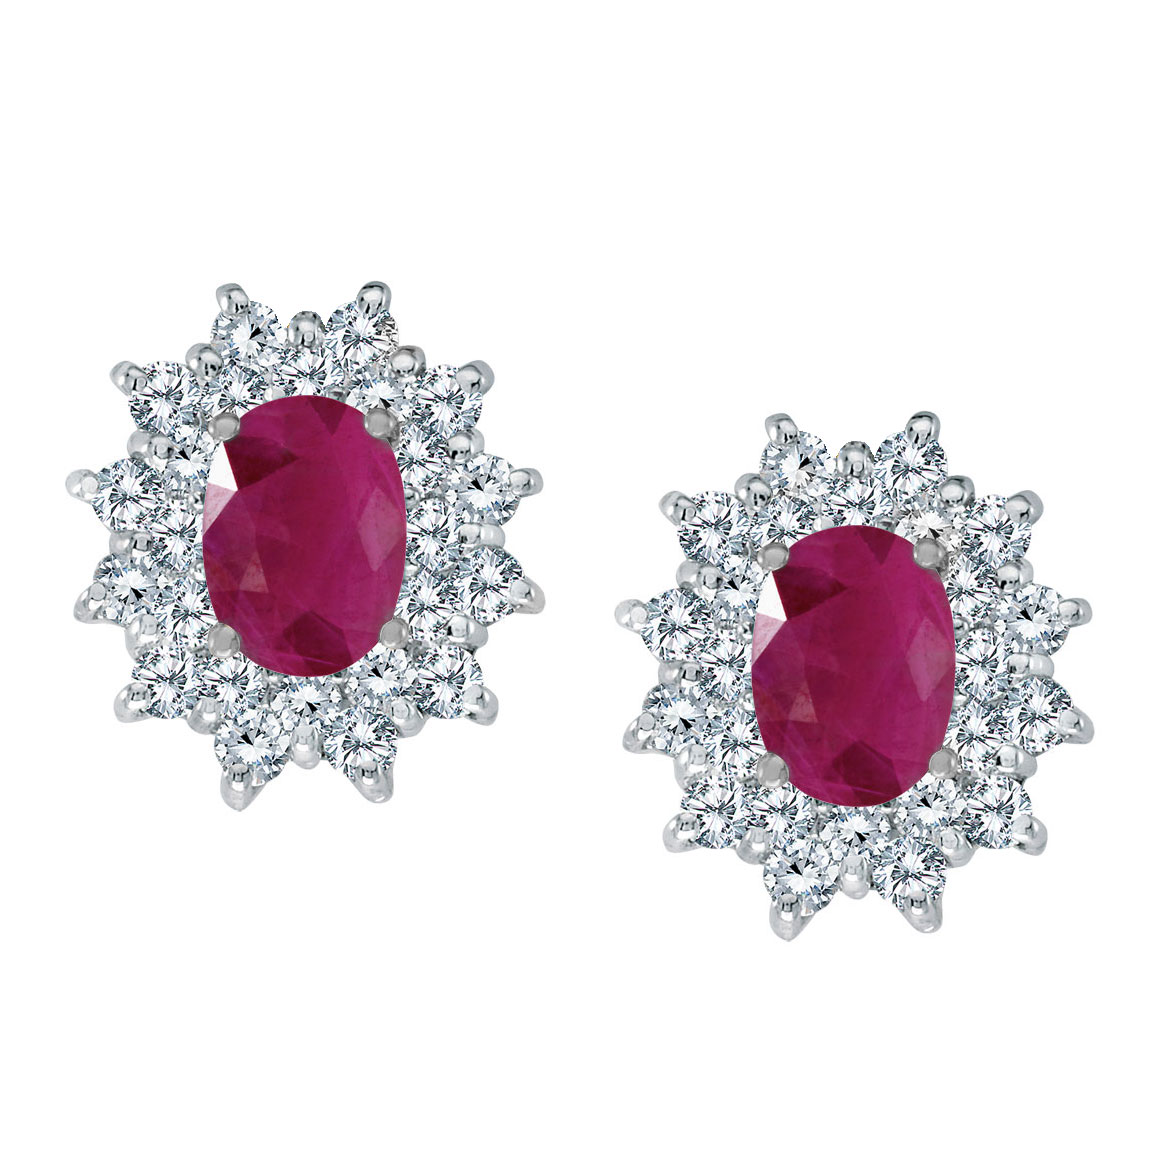 Bright 14k white gold earrings featuring 7x5 mm rubies surrounded by 1.00 total carat of scintillating diamonds.